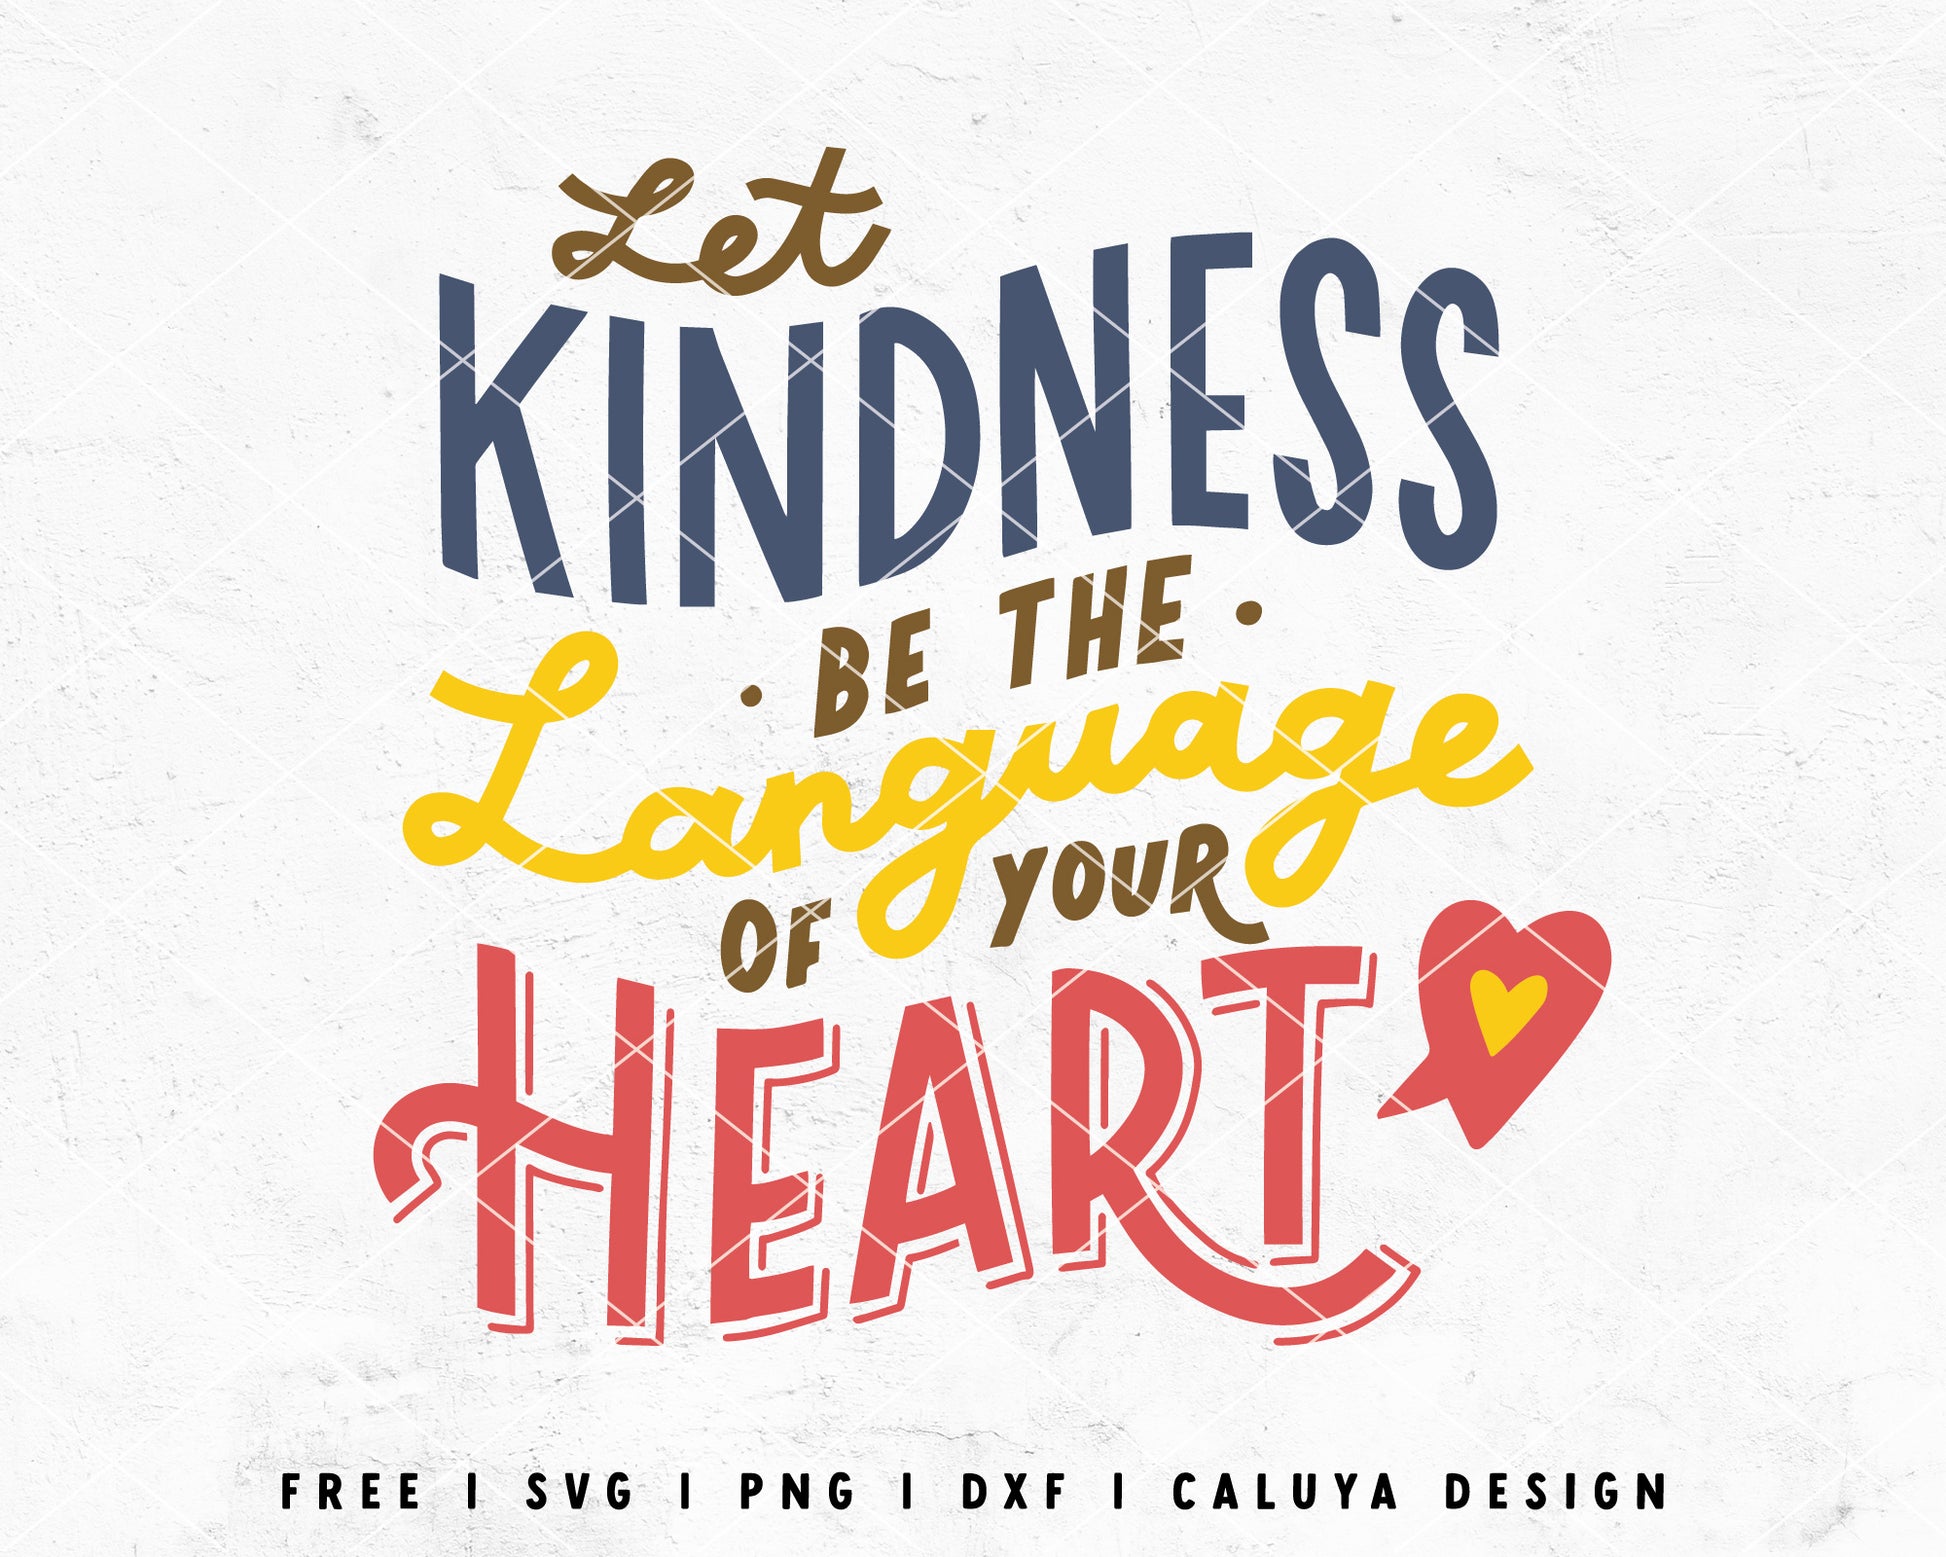 FREE Kindness SVG | Inspirational SVG Cut File for Cricut, Cameo Silhouette | Free SVG Cut File